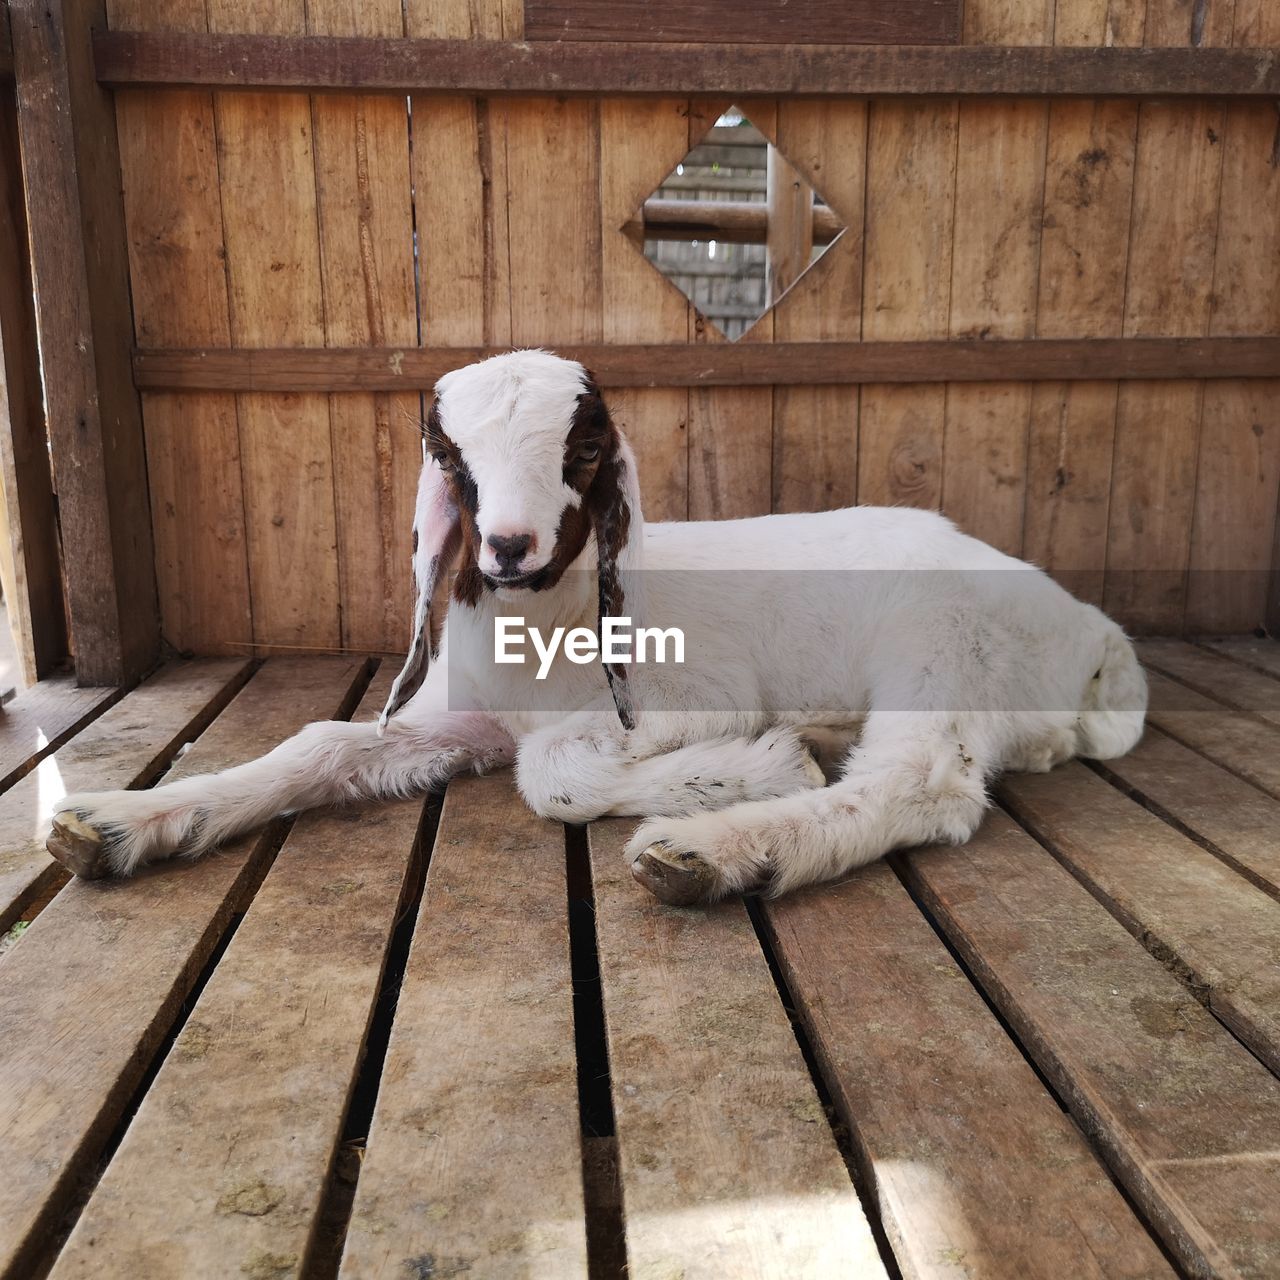 VIEW OF DOG LYING ON WOODEN FLOOR